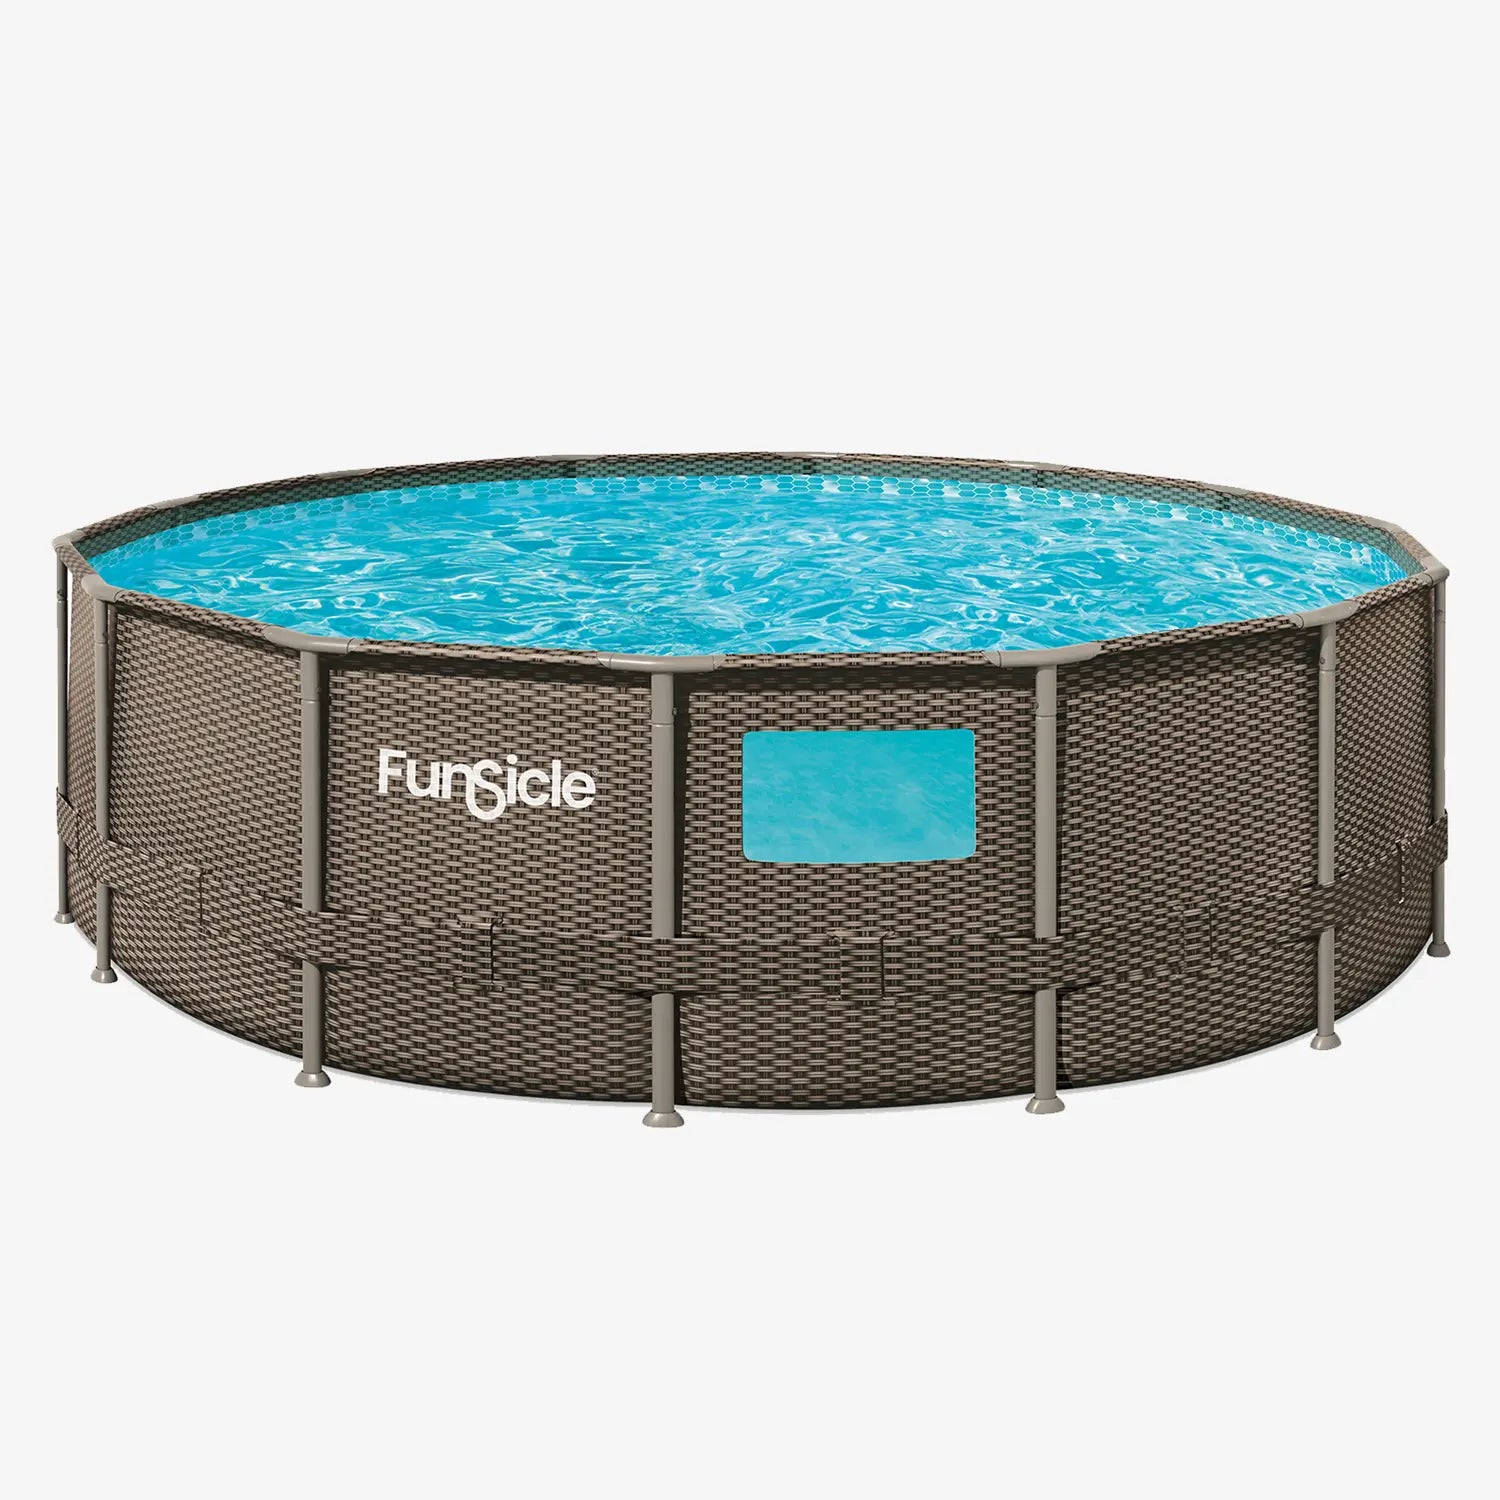 Funsicle 16 ft Crystal Vue Oasis Designer Pool - Dark Double Rattan without people